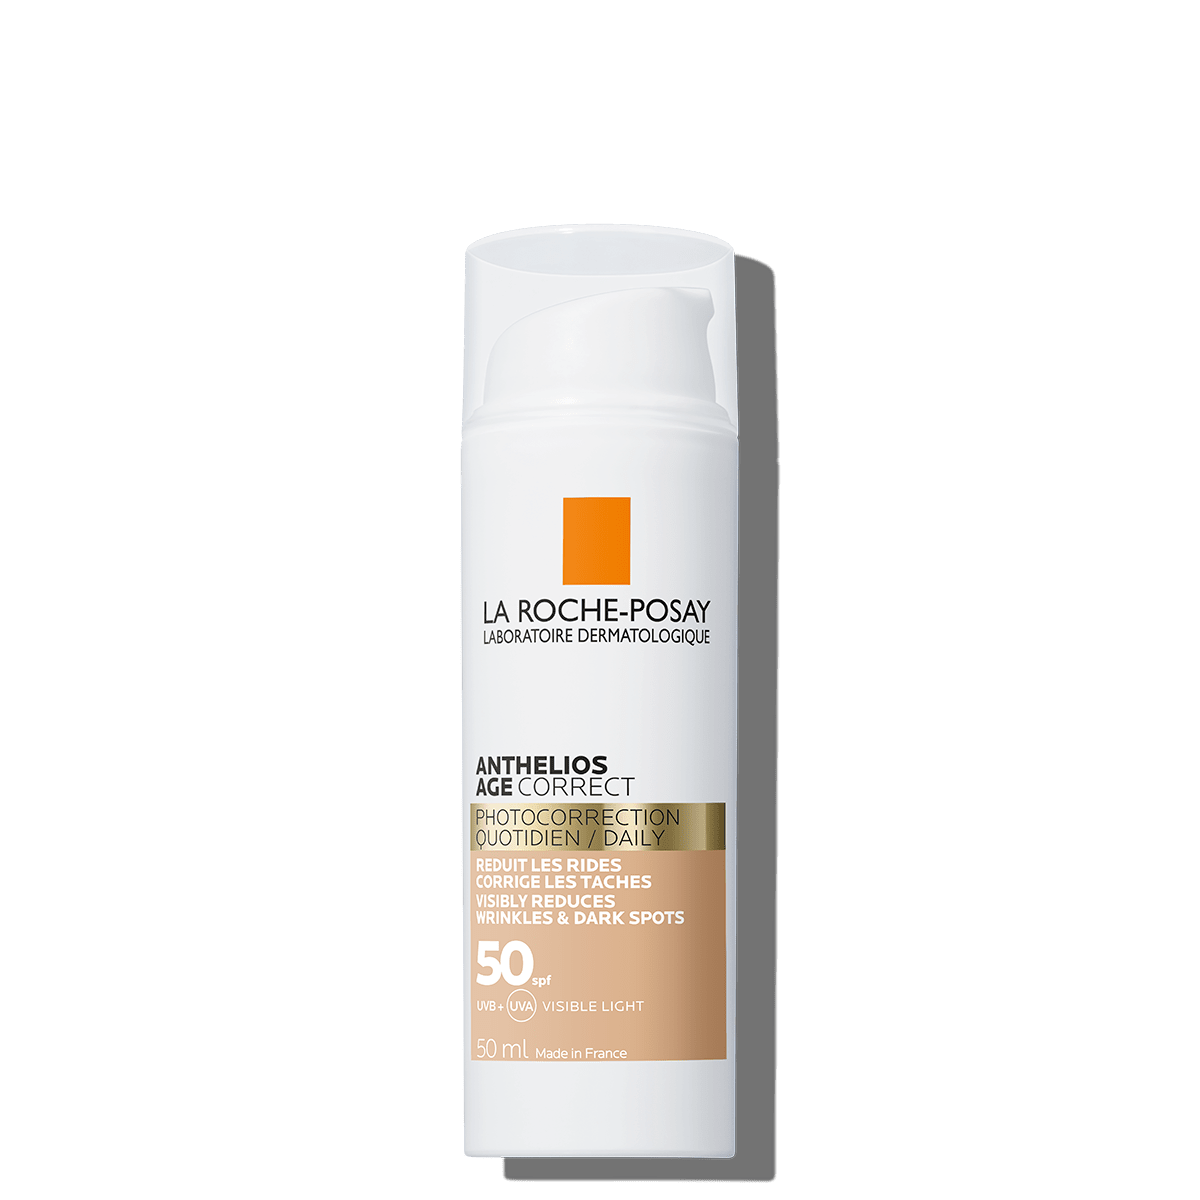 La-Roche-Posay-Anthelios-Age-Correct-SPF50-50ml-Teinted-LD-000-3337875764353-Closed-FS S